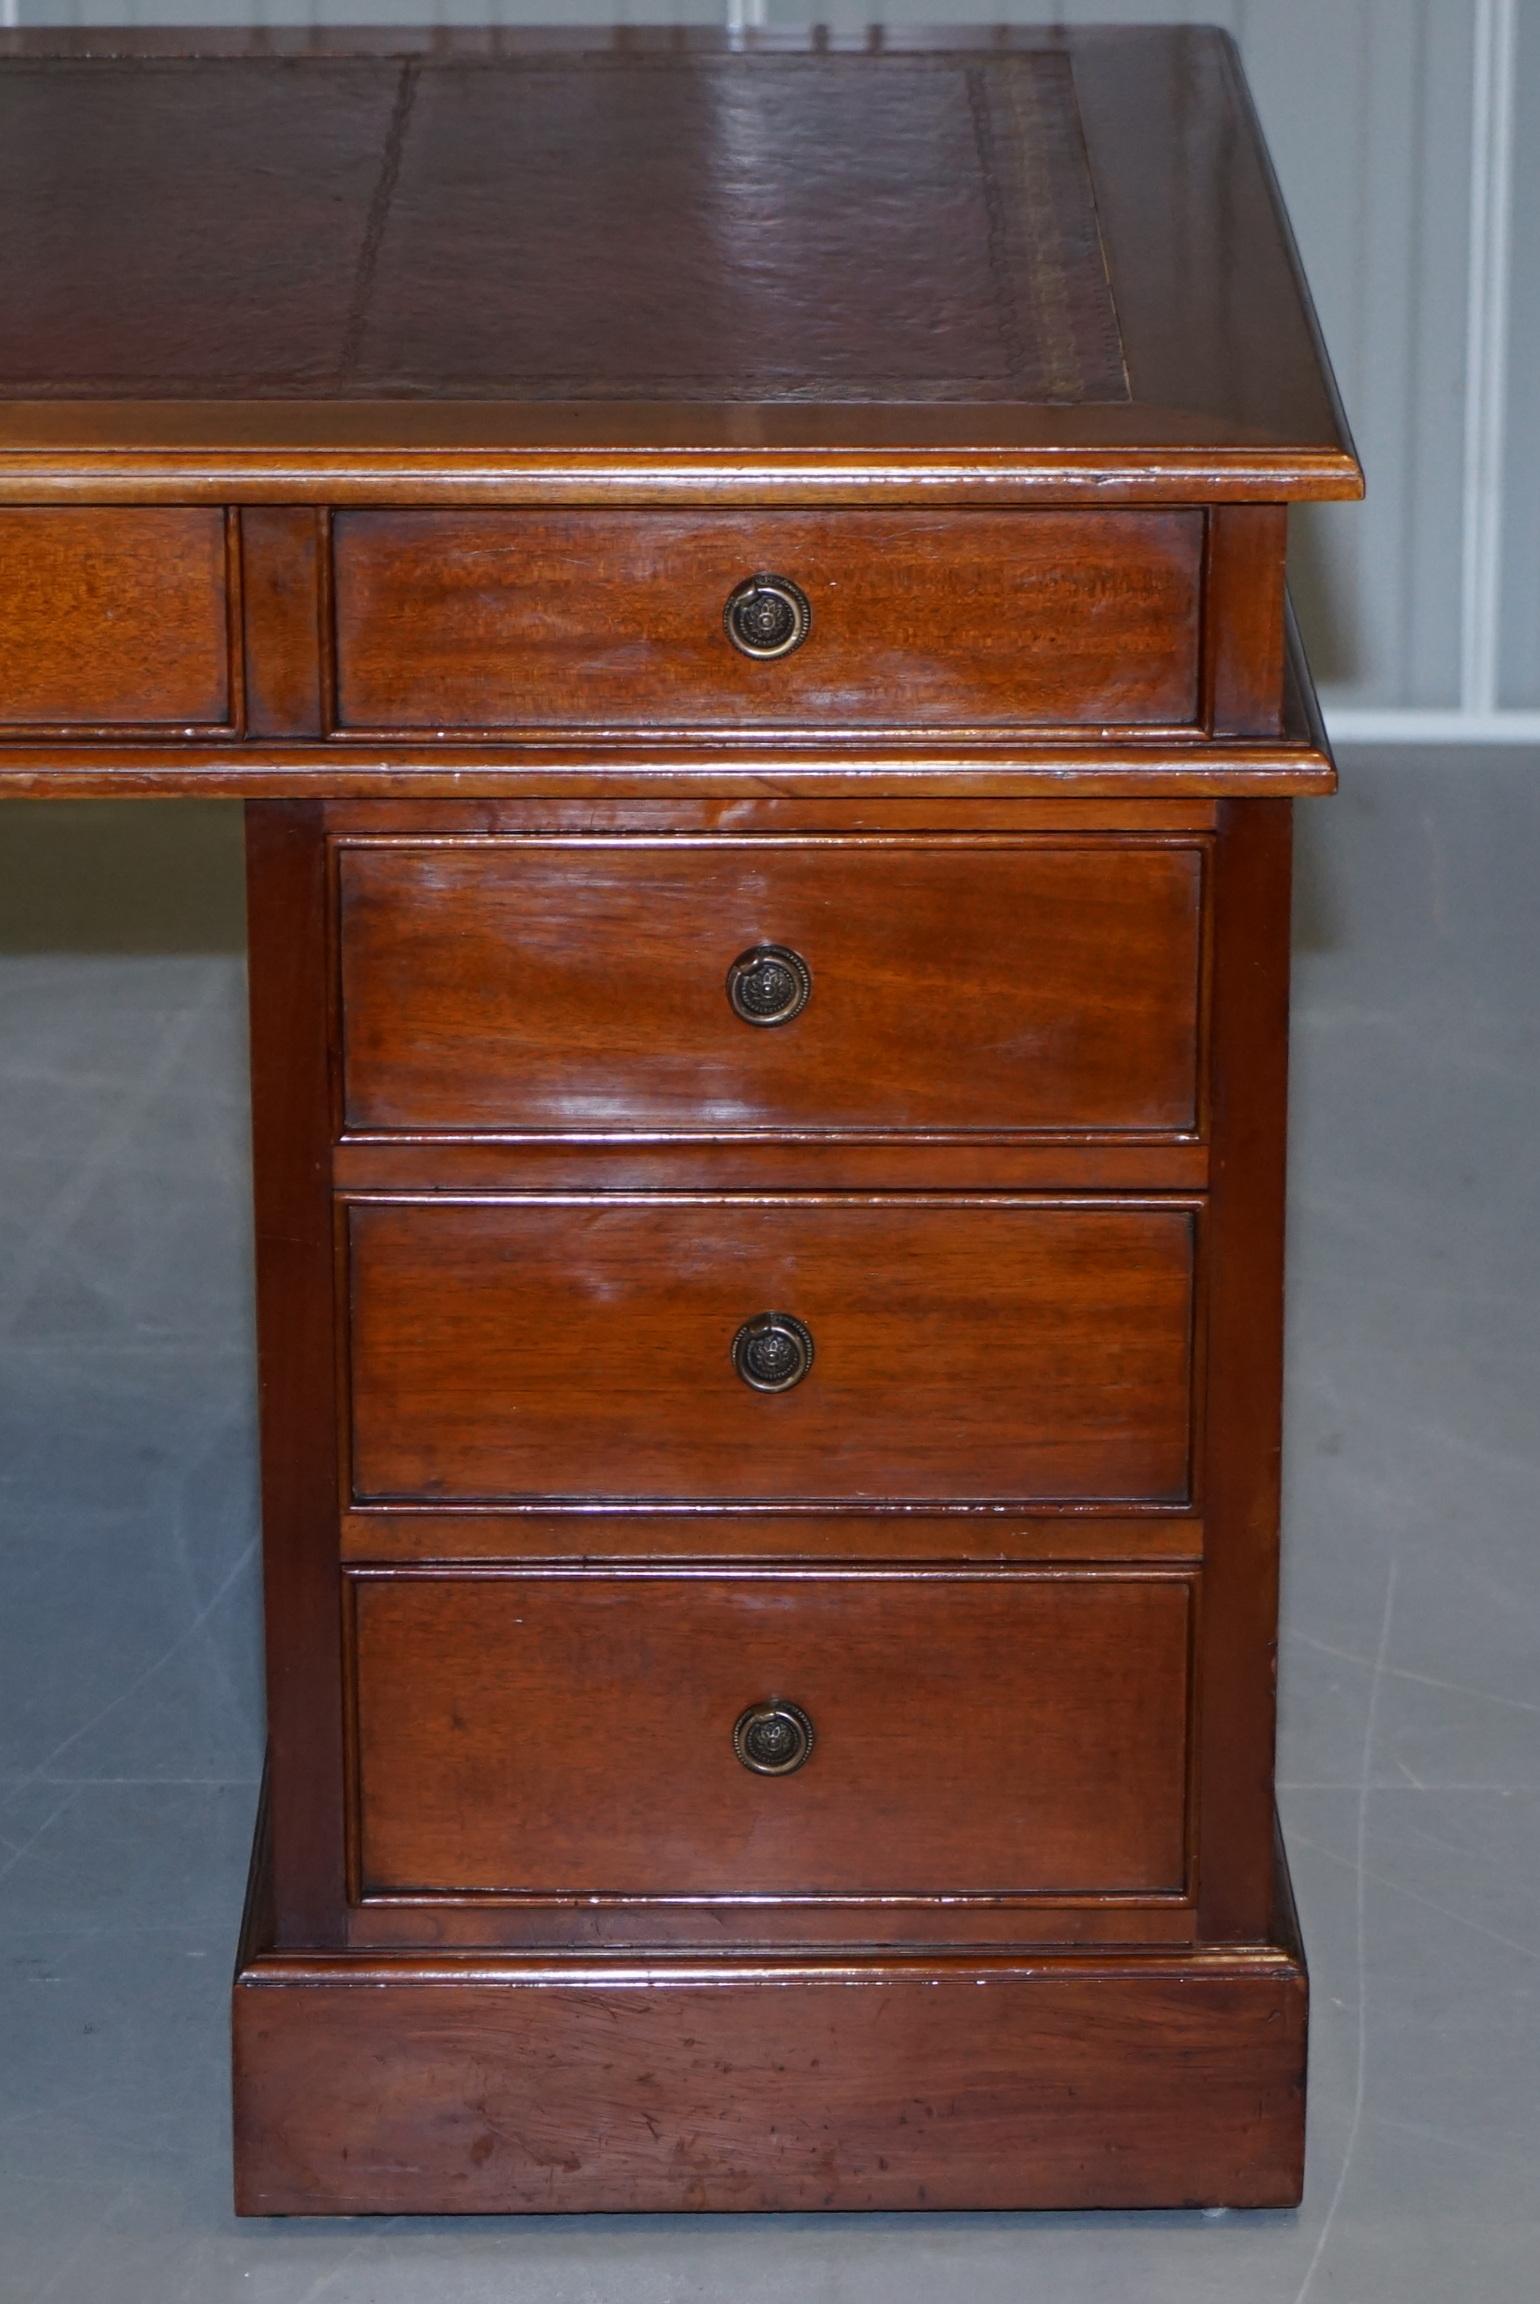 20th Century Panelled Cherry Wood Twin Pedestal Partner Desk Oxblood Leather Writing Surface